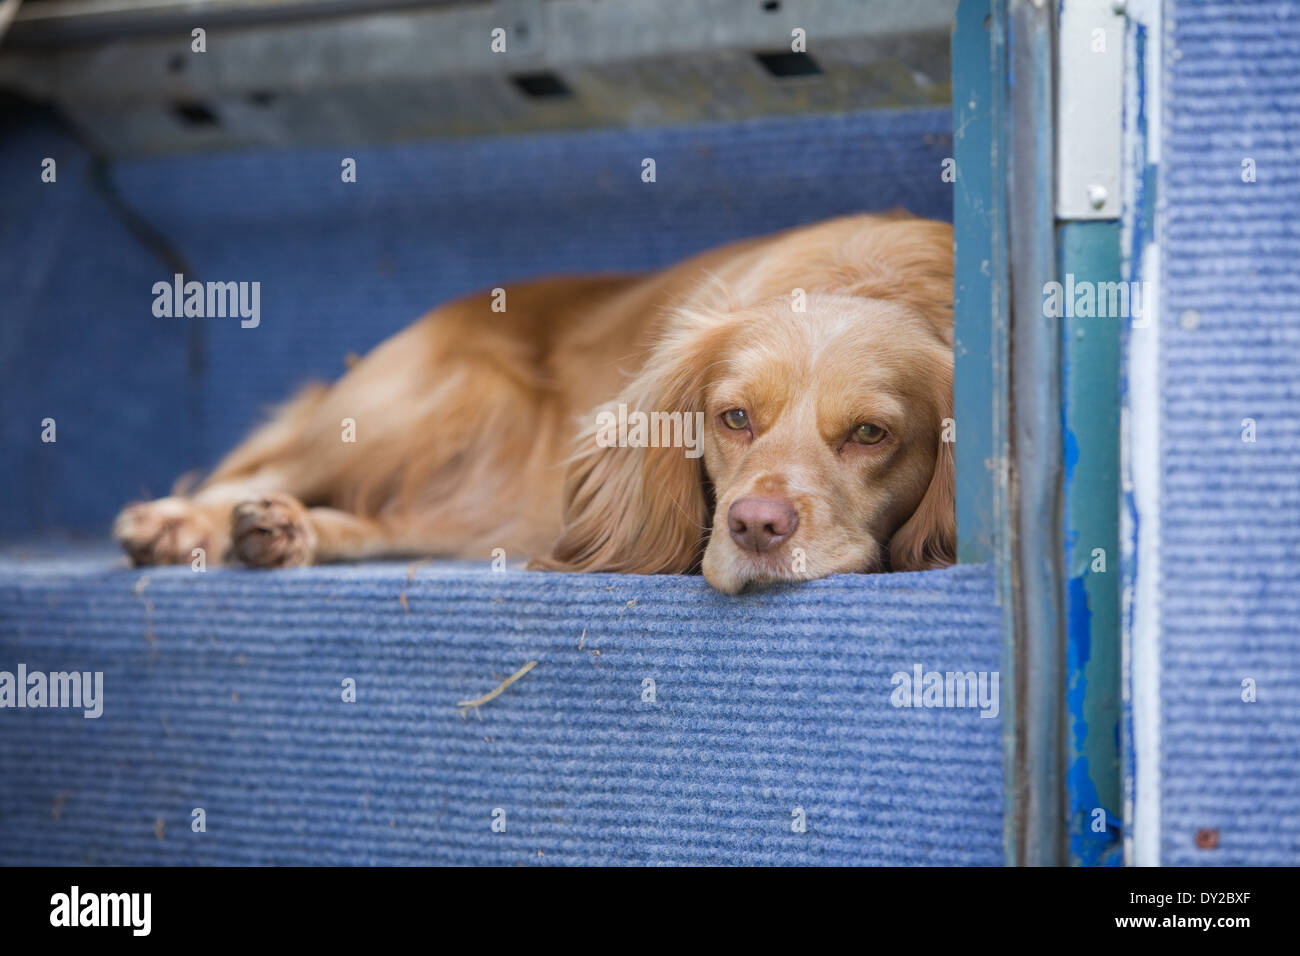 A golden cocker spaniel working dog laying down in the back of an old Land Rover vehicle Stock Photo